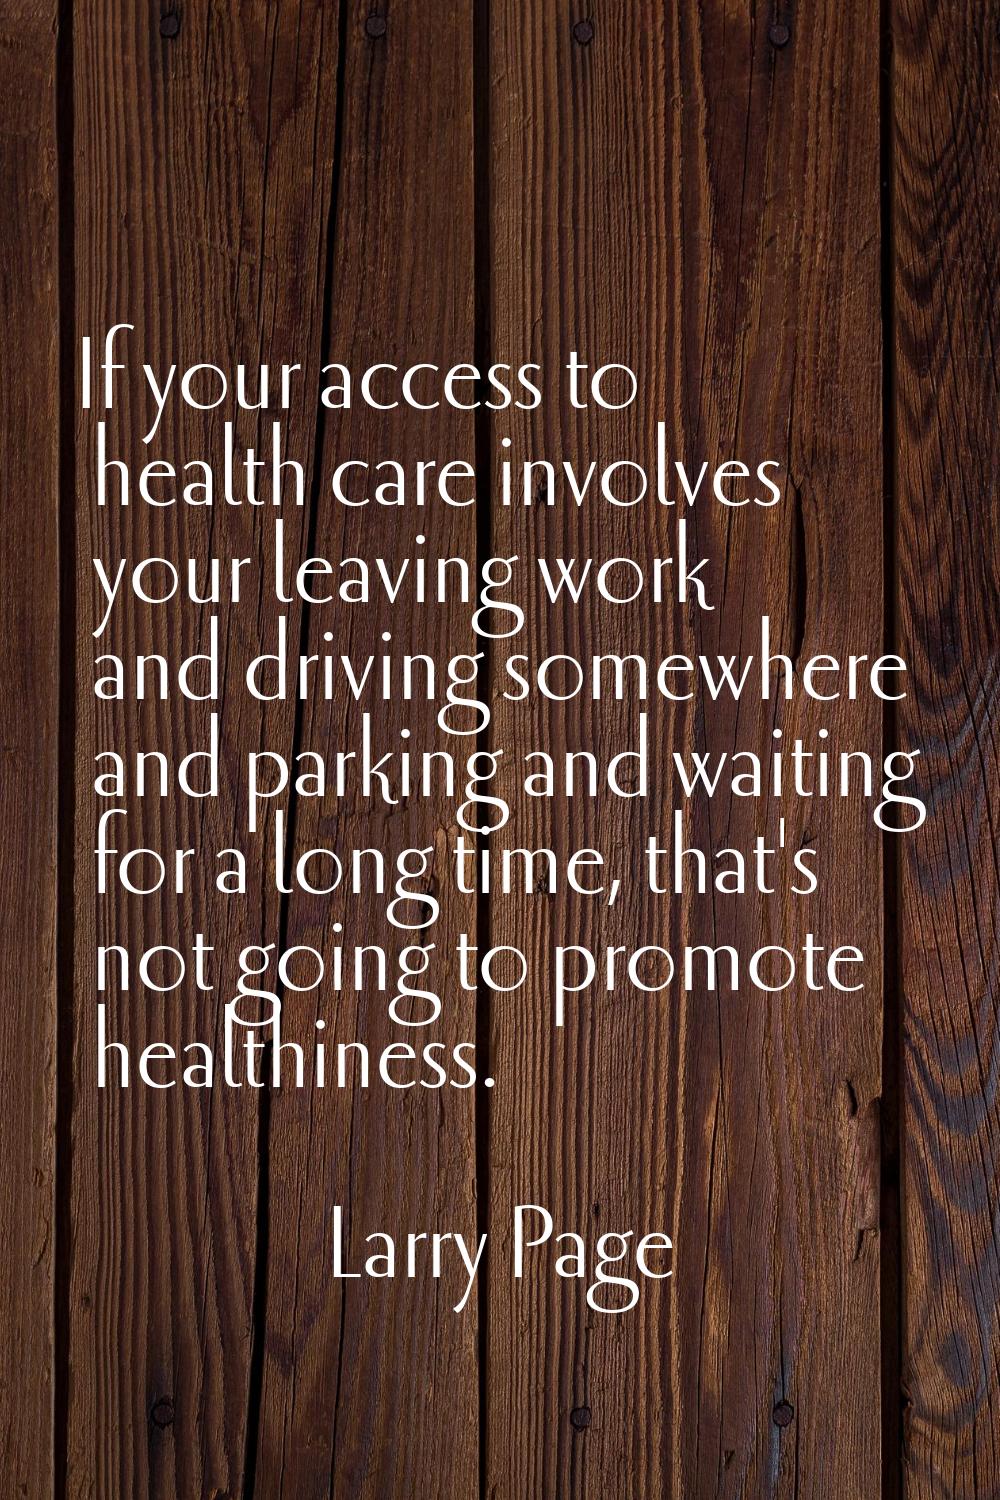 If your access to health care involves your leaving work and driving somewhere and parking and wait